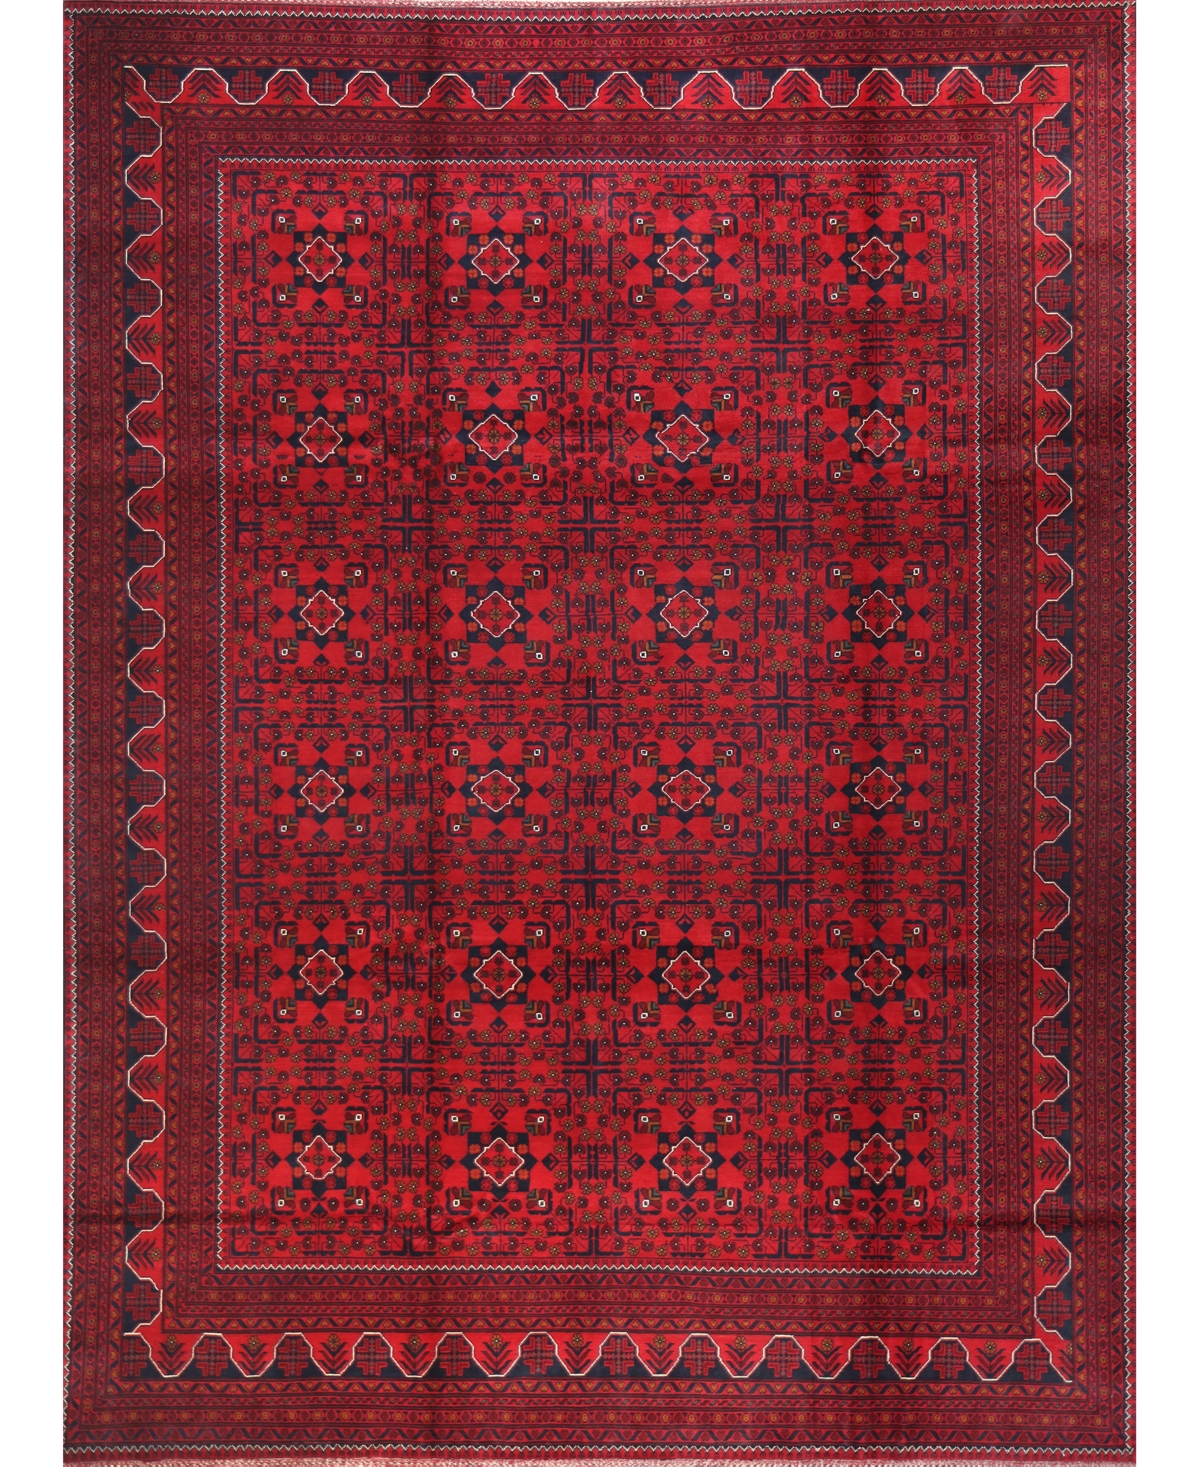 Bb Rugs One Of A Kind Fine Beshir 8'2" X 11'9" Area Rug In Red